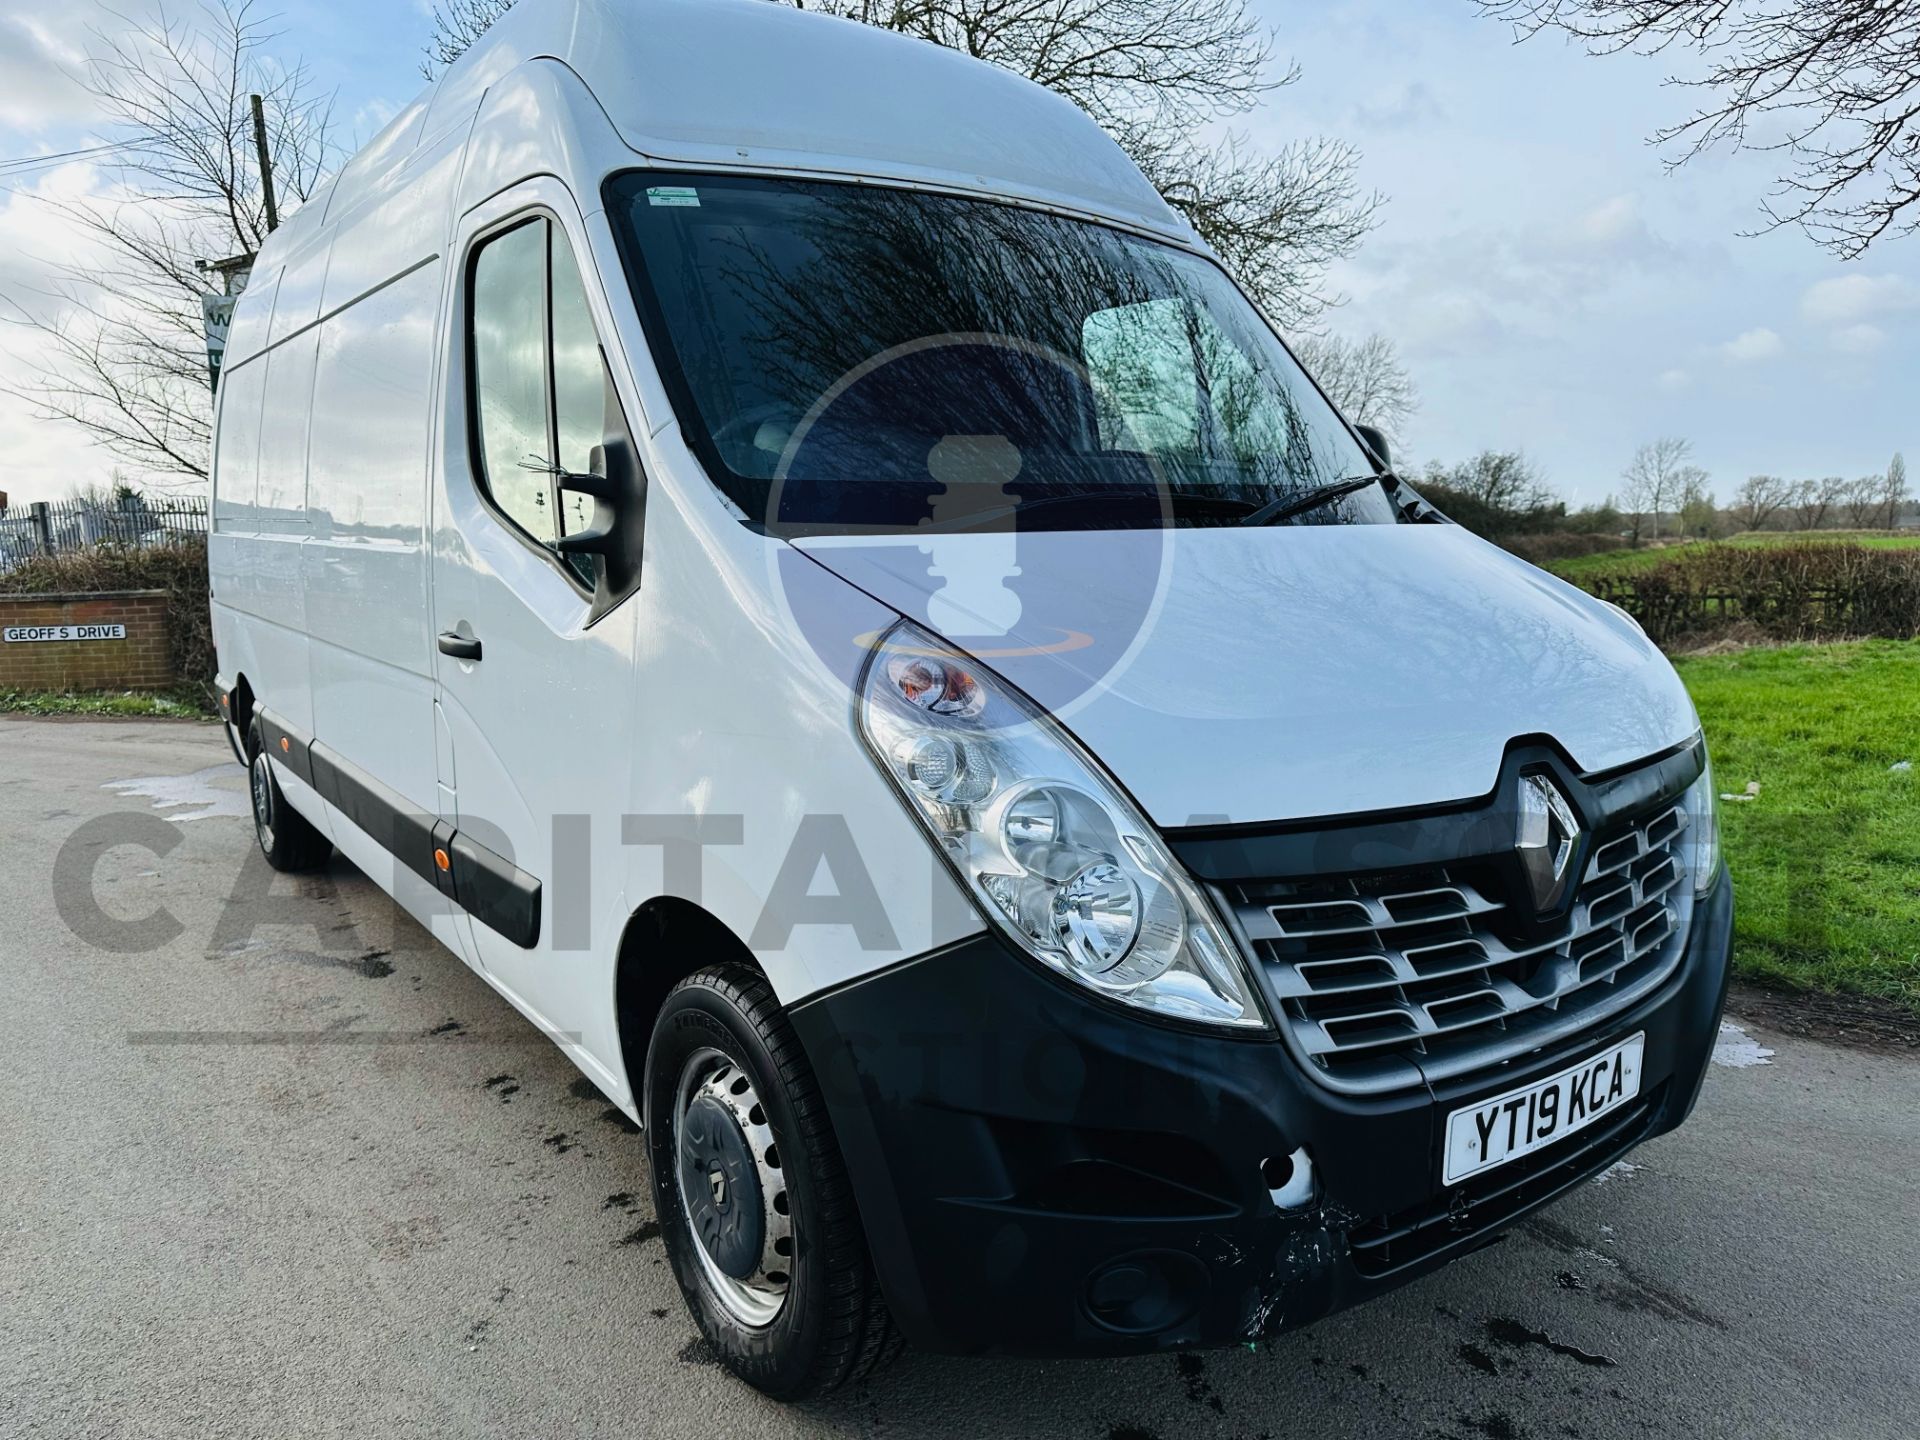 (On Sale) RENAULT MASTER *BUSINESS ENERGY* LWB EXTRA HI-ROOF (2019 - EURO 6) 2.3 DCI - 145 BHP - Image 2 of 25